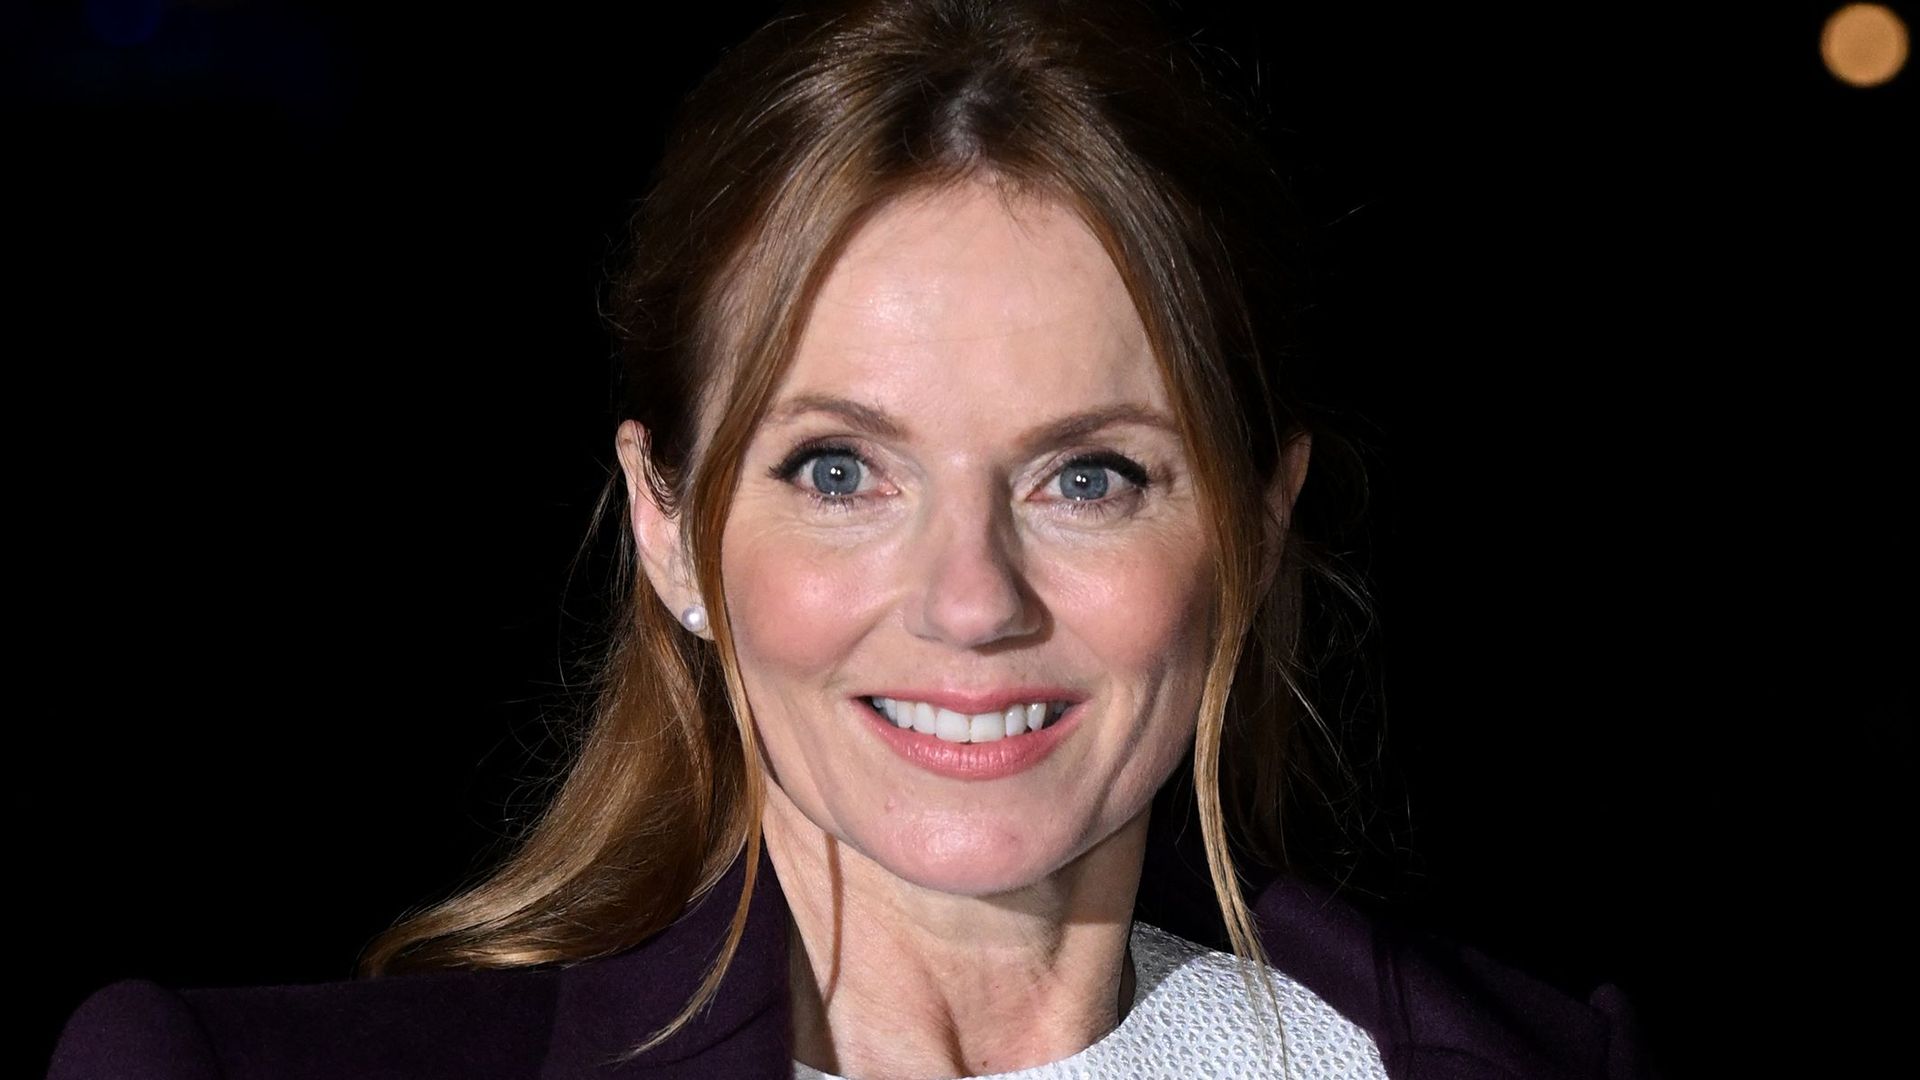 Geri Halliwell-Horner wearing white dress and black blazer at Rosie Frost and The Falcon book launch